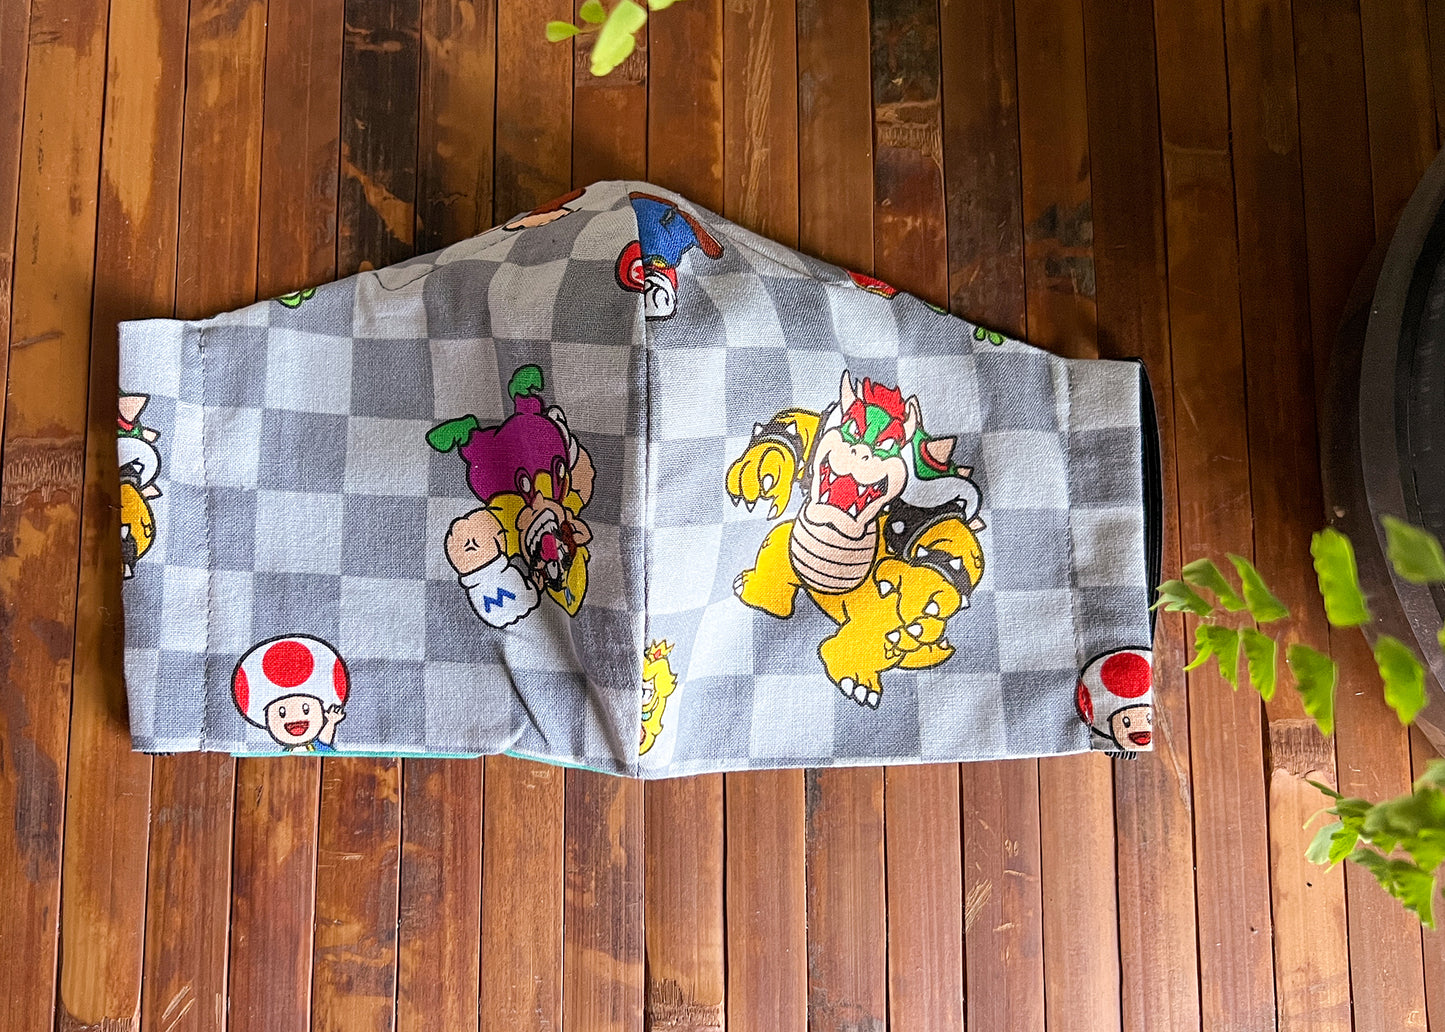 Mario Kart Face Mask | Video Game Character Cotton Dust Covering | Nerdy Geeky Fitted Washable Reusable Handmade | Nose Wire Filter Pocket